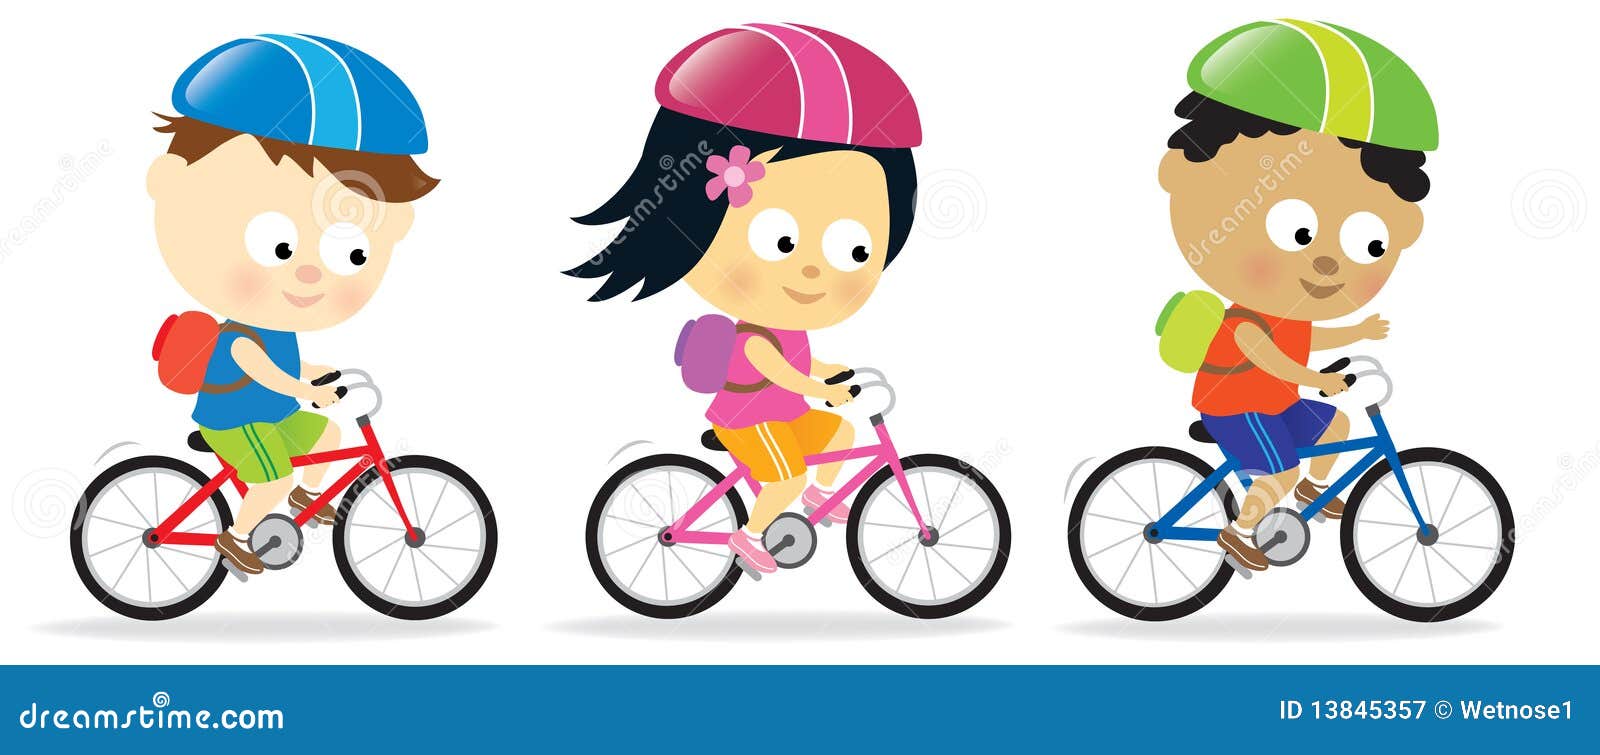 free clip art child riding bicycle - photo #9